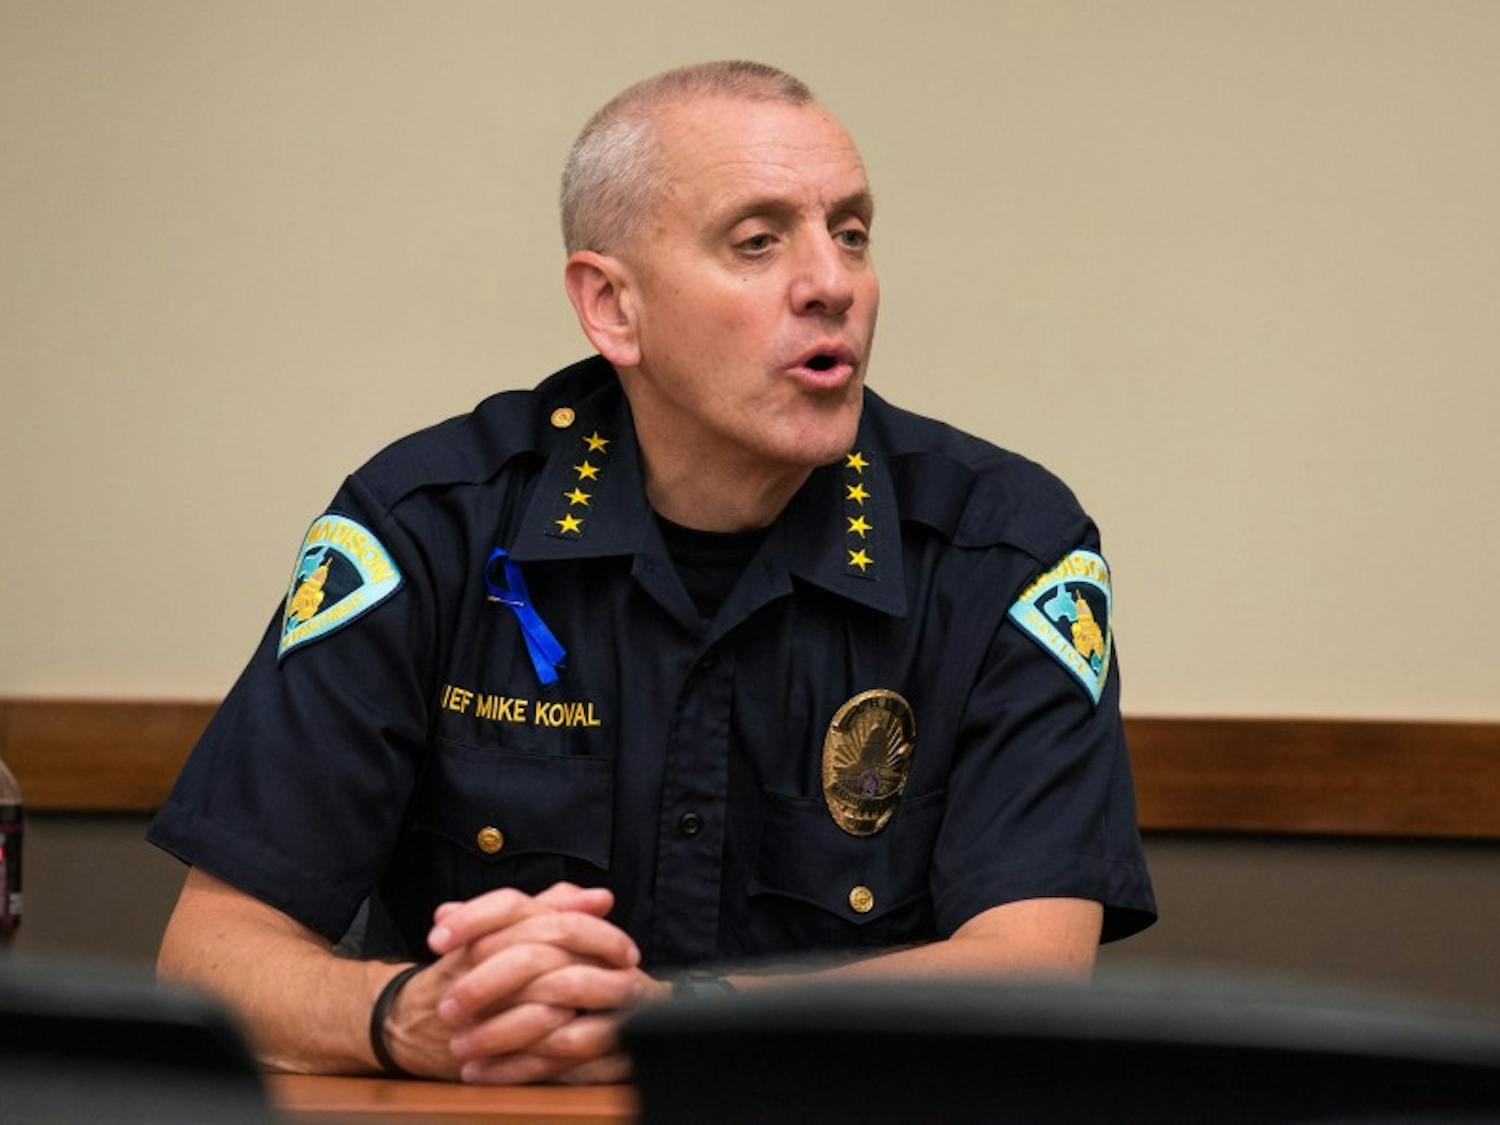 Madison Police Department Chief Mike Koval said Sunday that local law enforcement will continue its current inclusive immigration policies, though the city is not formally a sanctuary city.